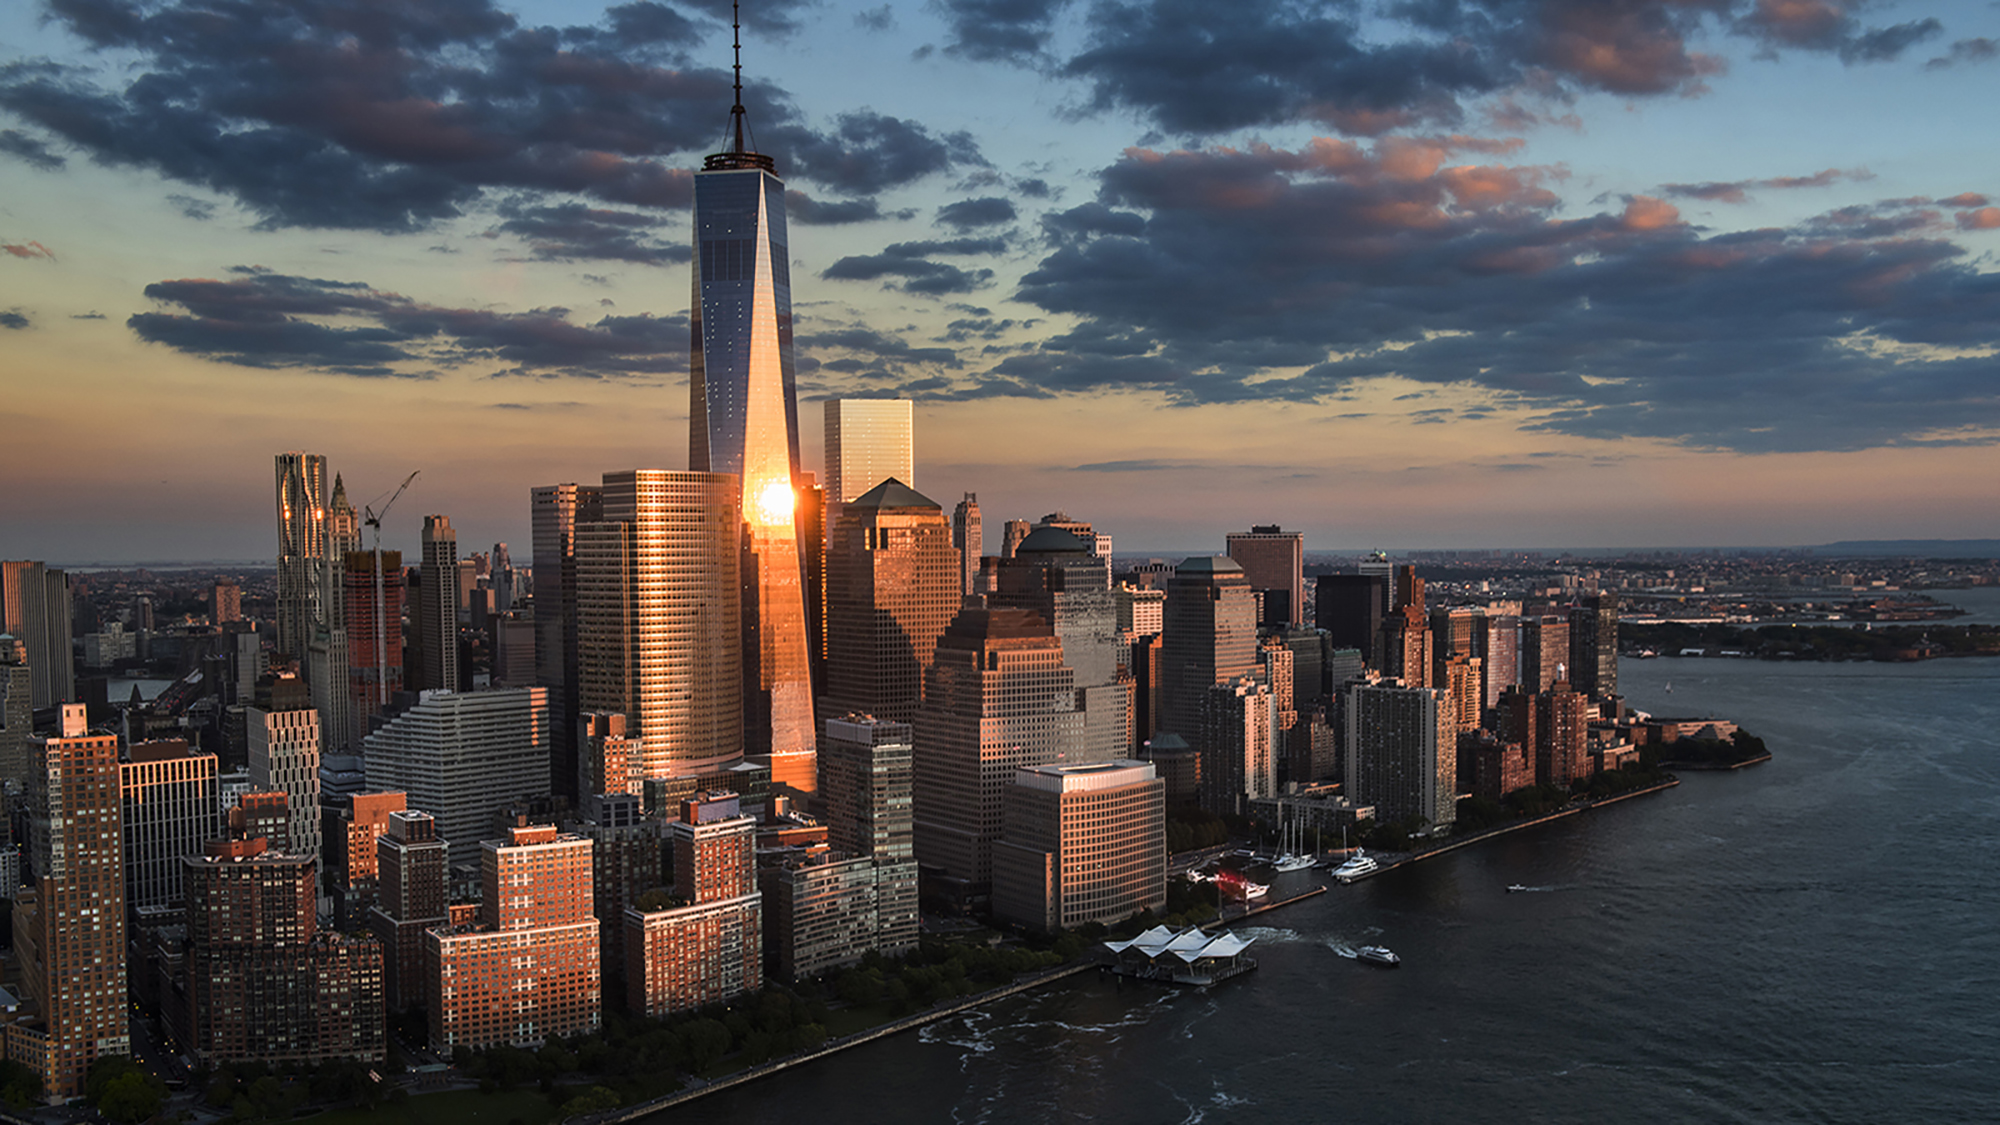 Building Industries served by MiTek - Aerial view of New York City at dusk showing Freedom tower with Benson Curtain Wall